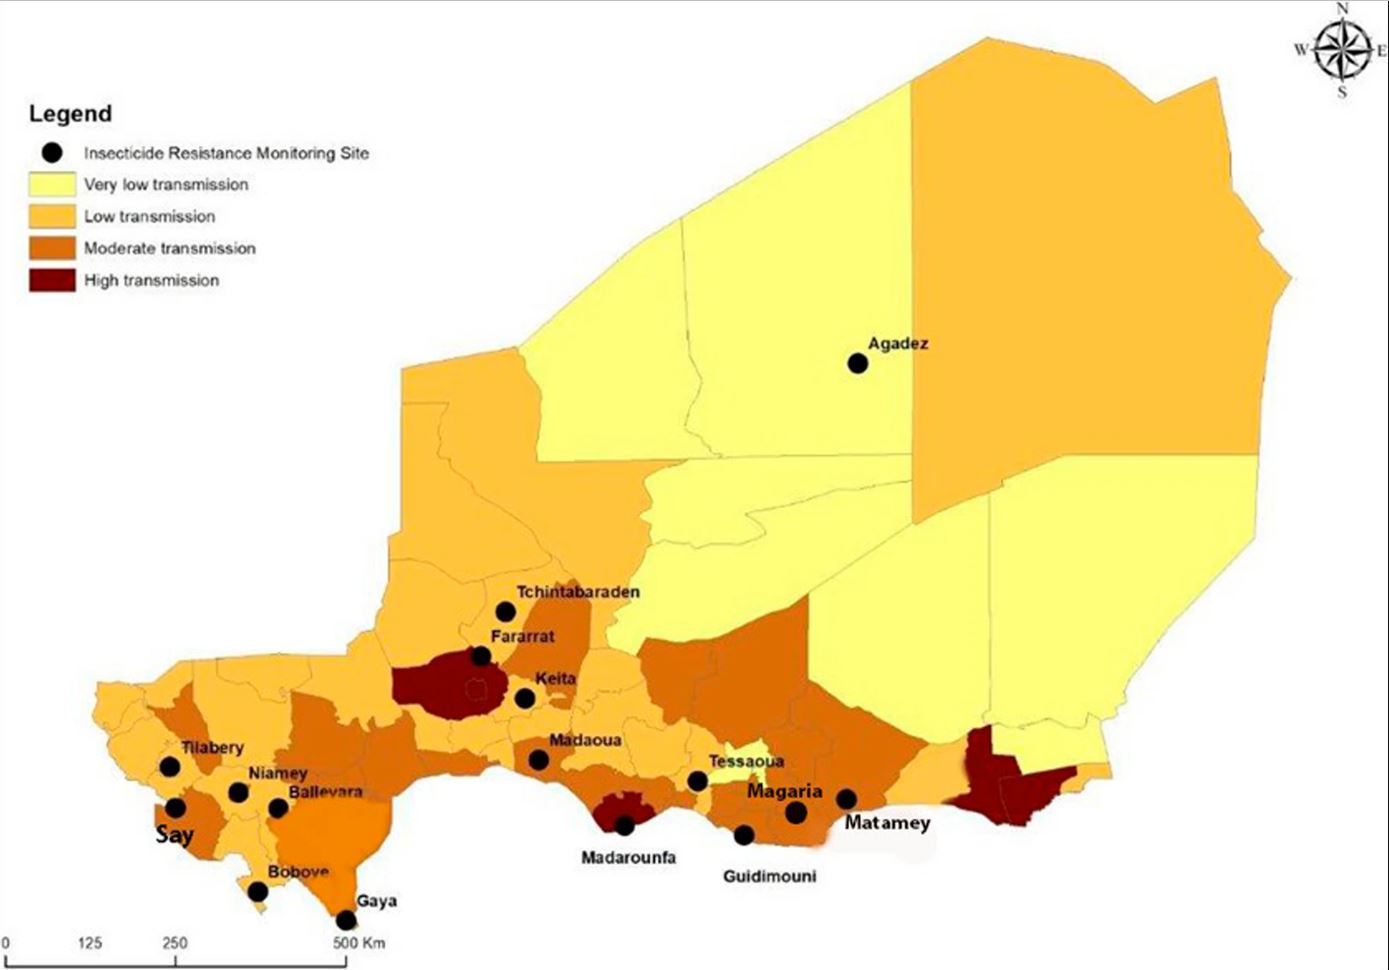 Map of Niger showing the severity of malaria transmission and where insecticide resistance monitoring sites are located.